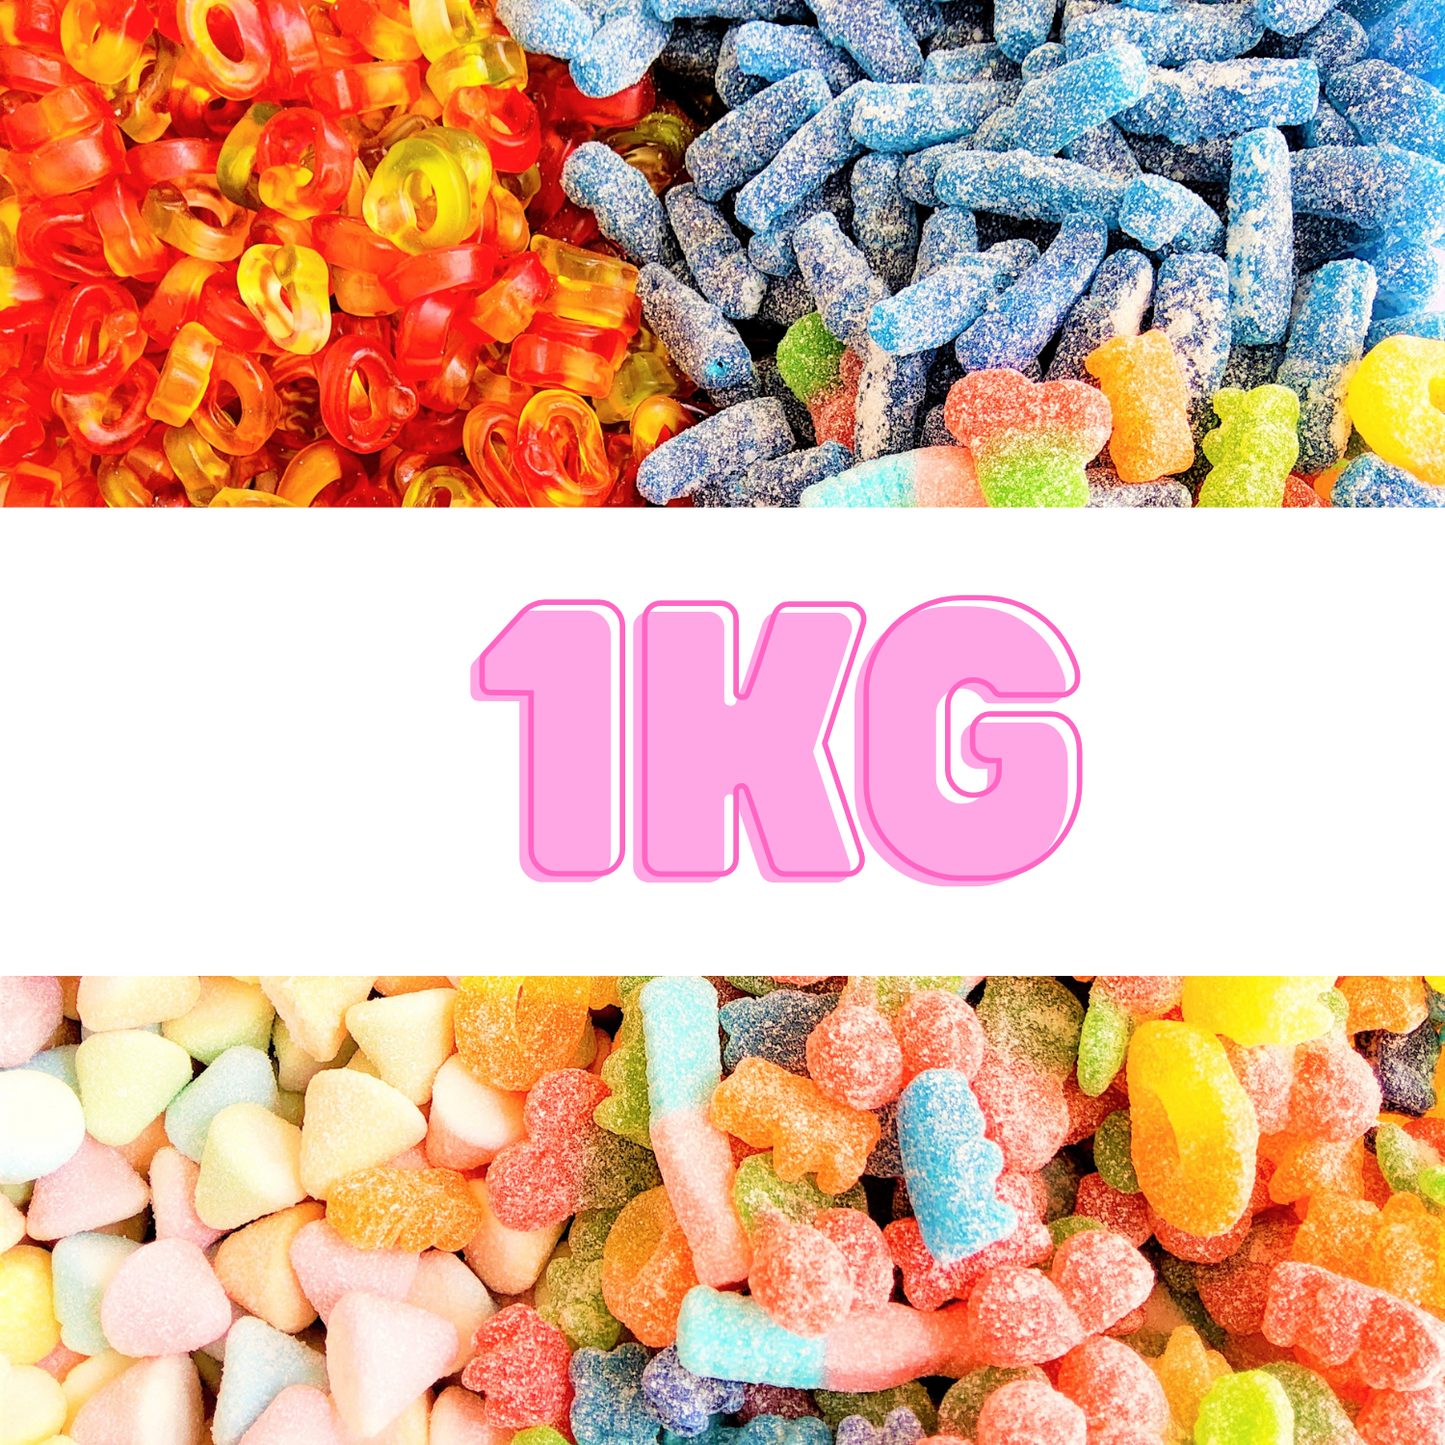 Create Your Own Pick`n MIx 1kg Box / Bag selection